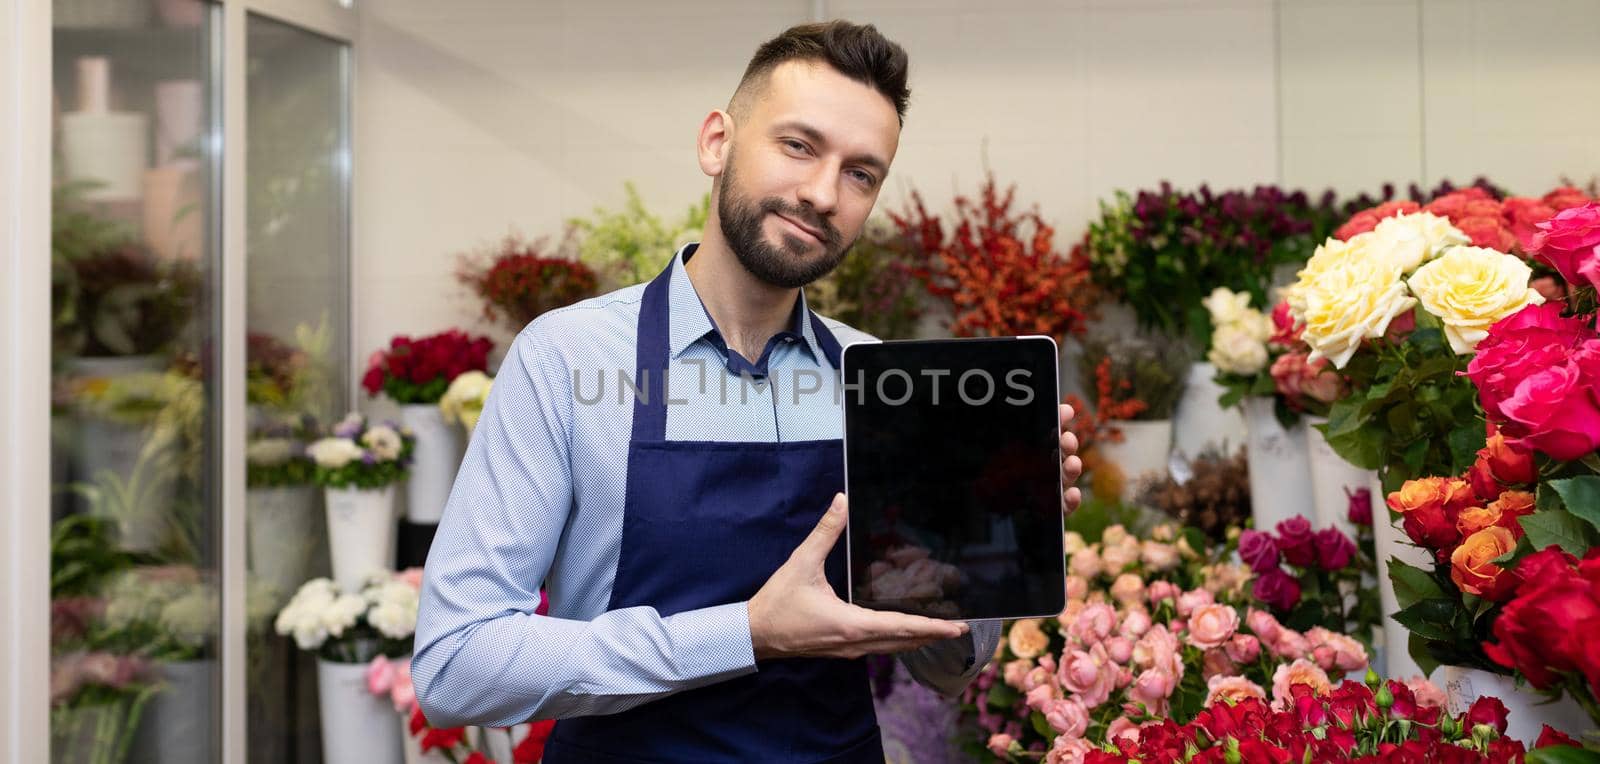 florist surrounded by fresh flowers demonstrates a tablet screen in a bouquets shop, concept of sale for Valentine's Day.